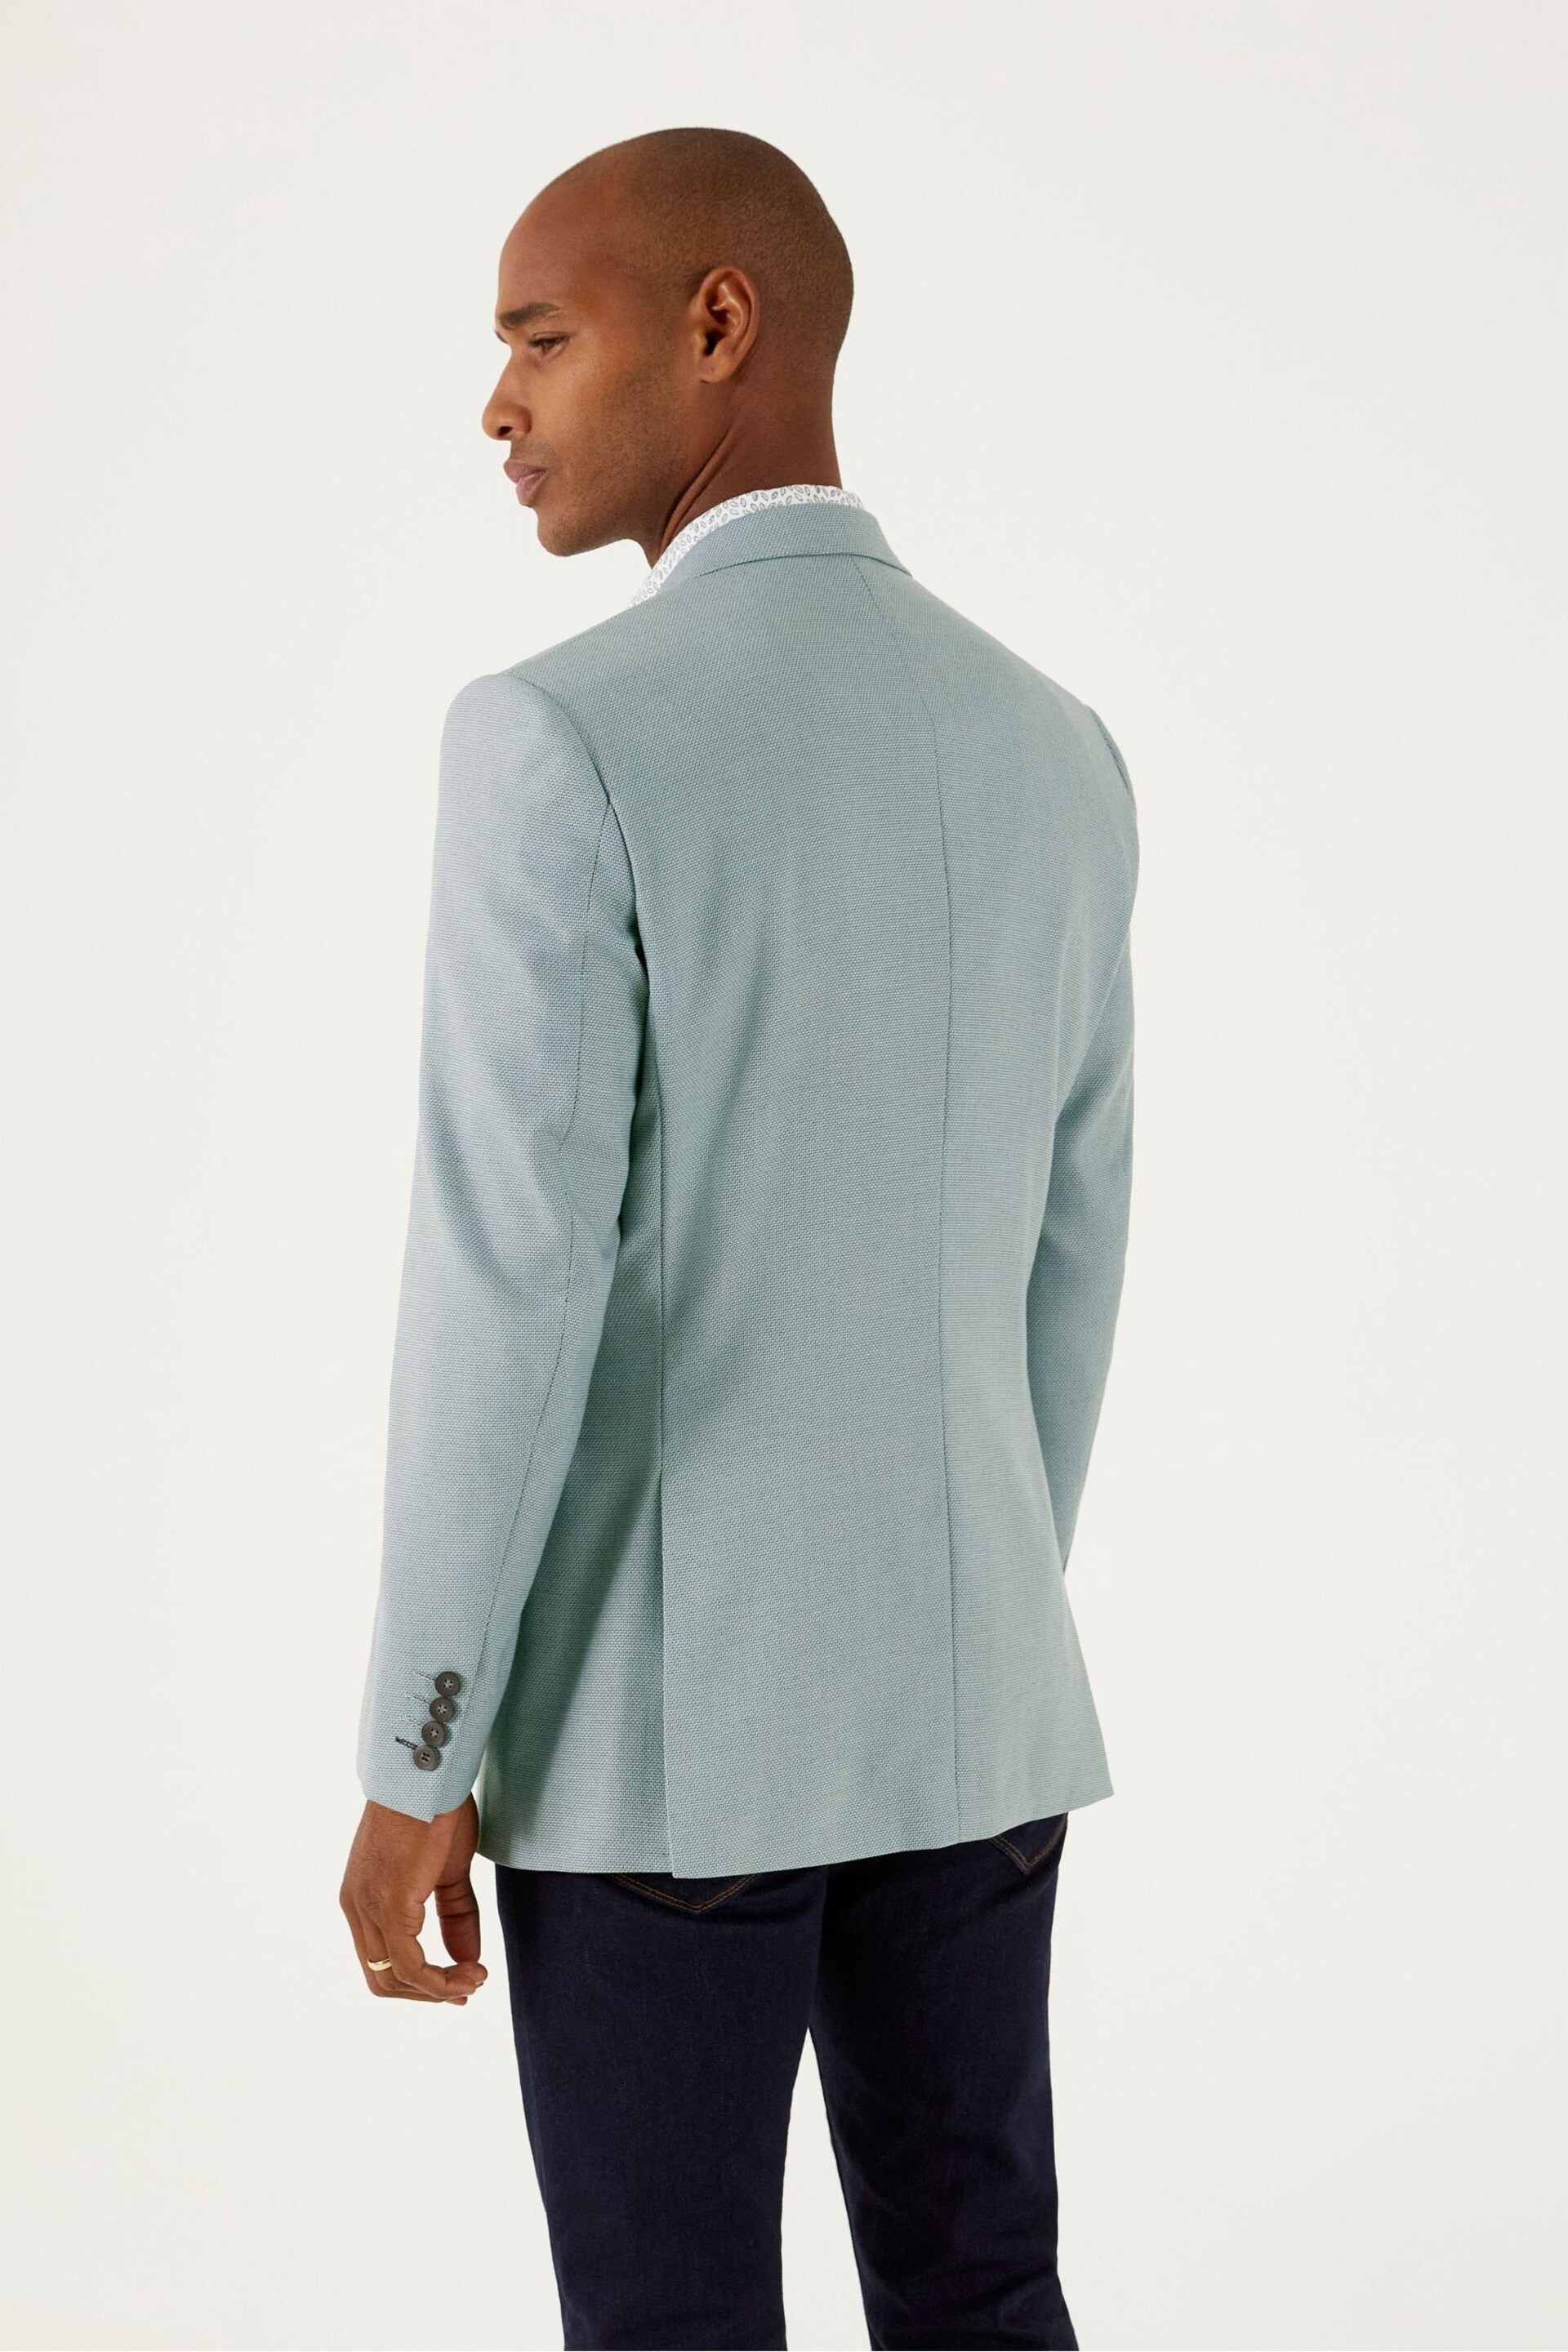 Skopes Tailored Fit Harry Mint Green Jacket - Image 3 of 6